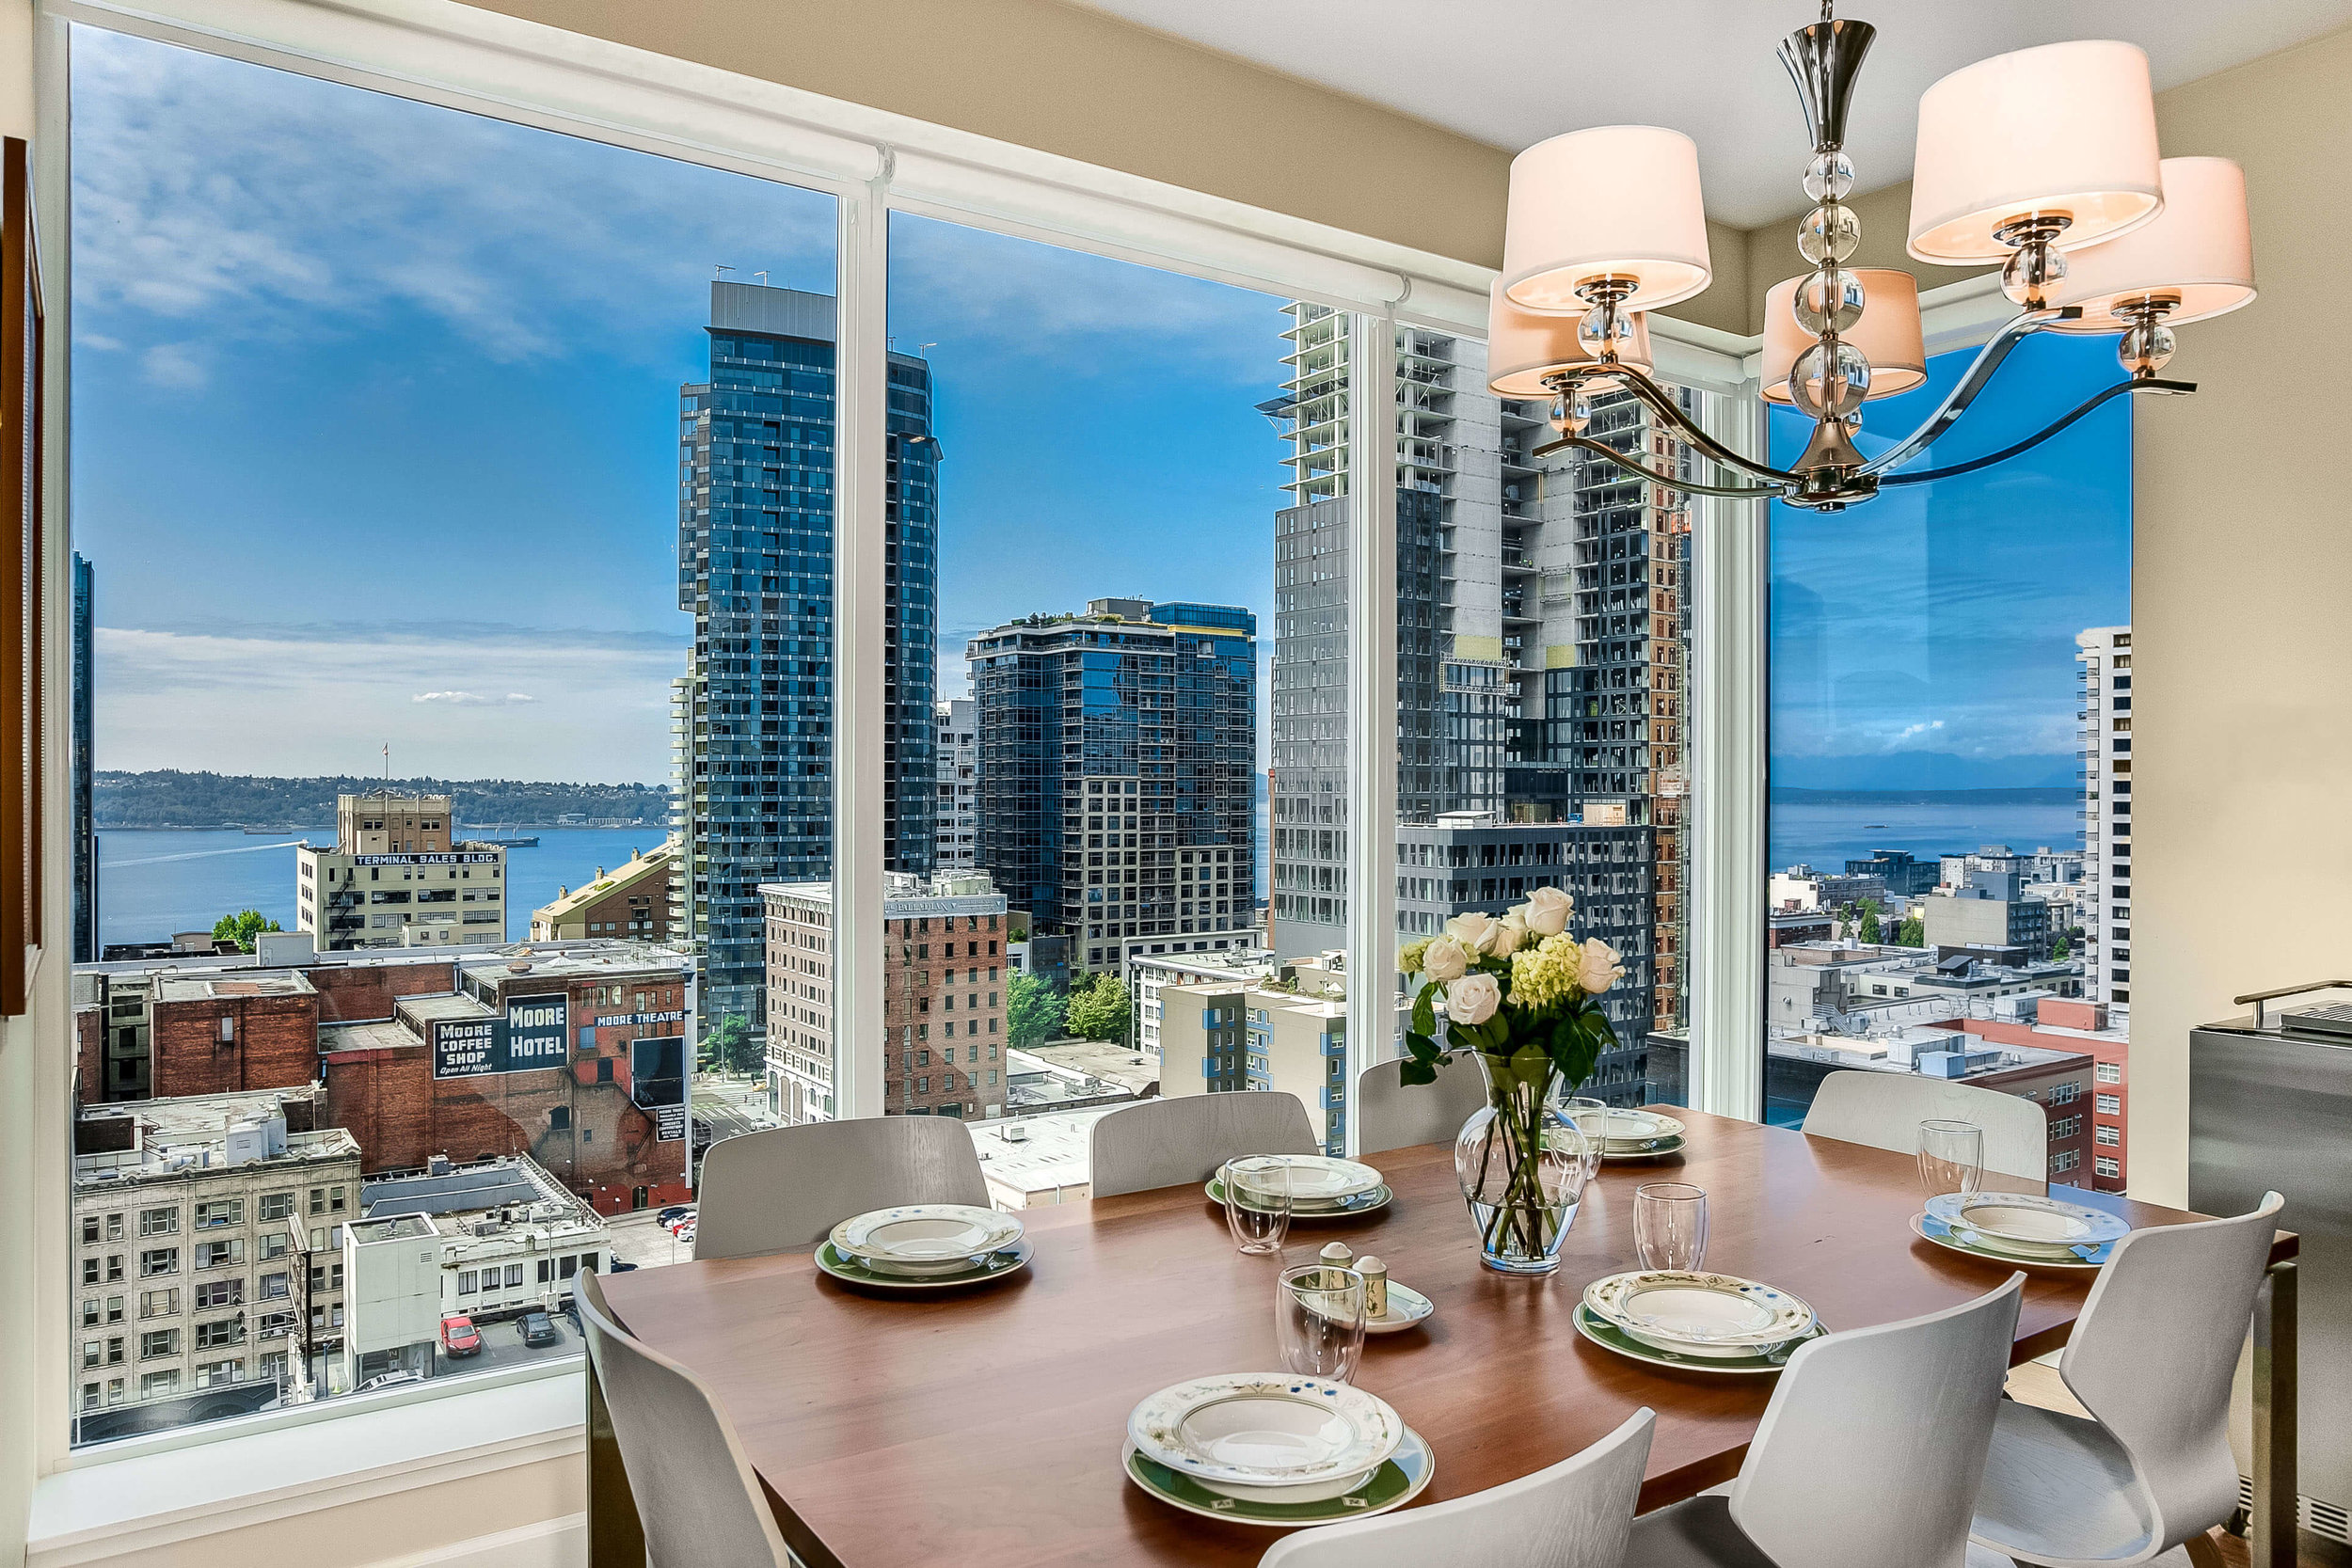 Escala-Condo-For-Sale-Puget-Sound-Downtown-Seattle-Views.jpg